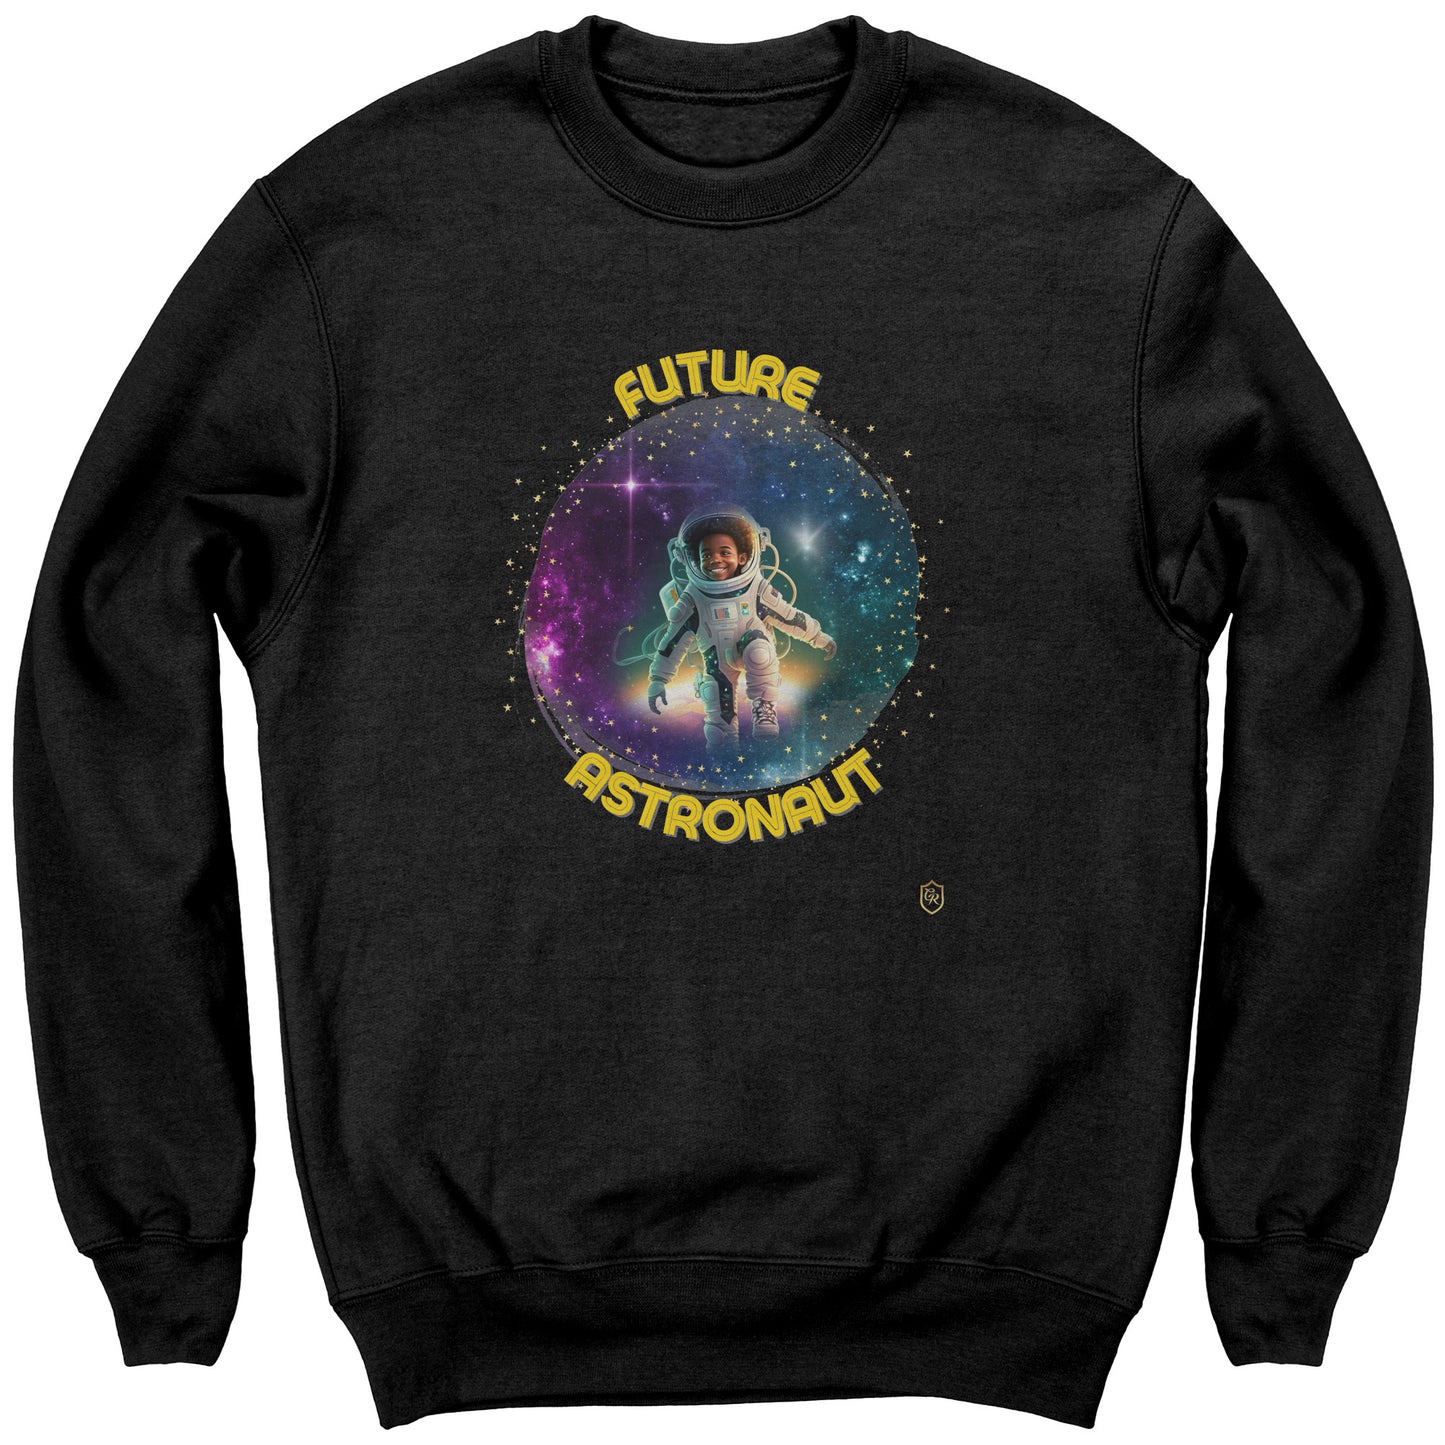 Young Boy's Galactic Explorer Sweatshirt: The Official Astronaut Gear of the Future